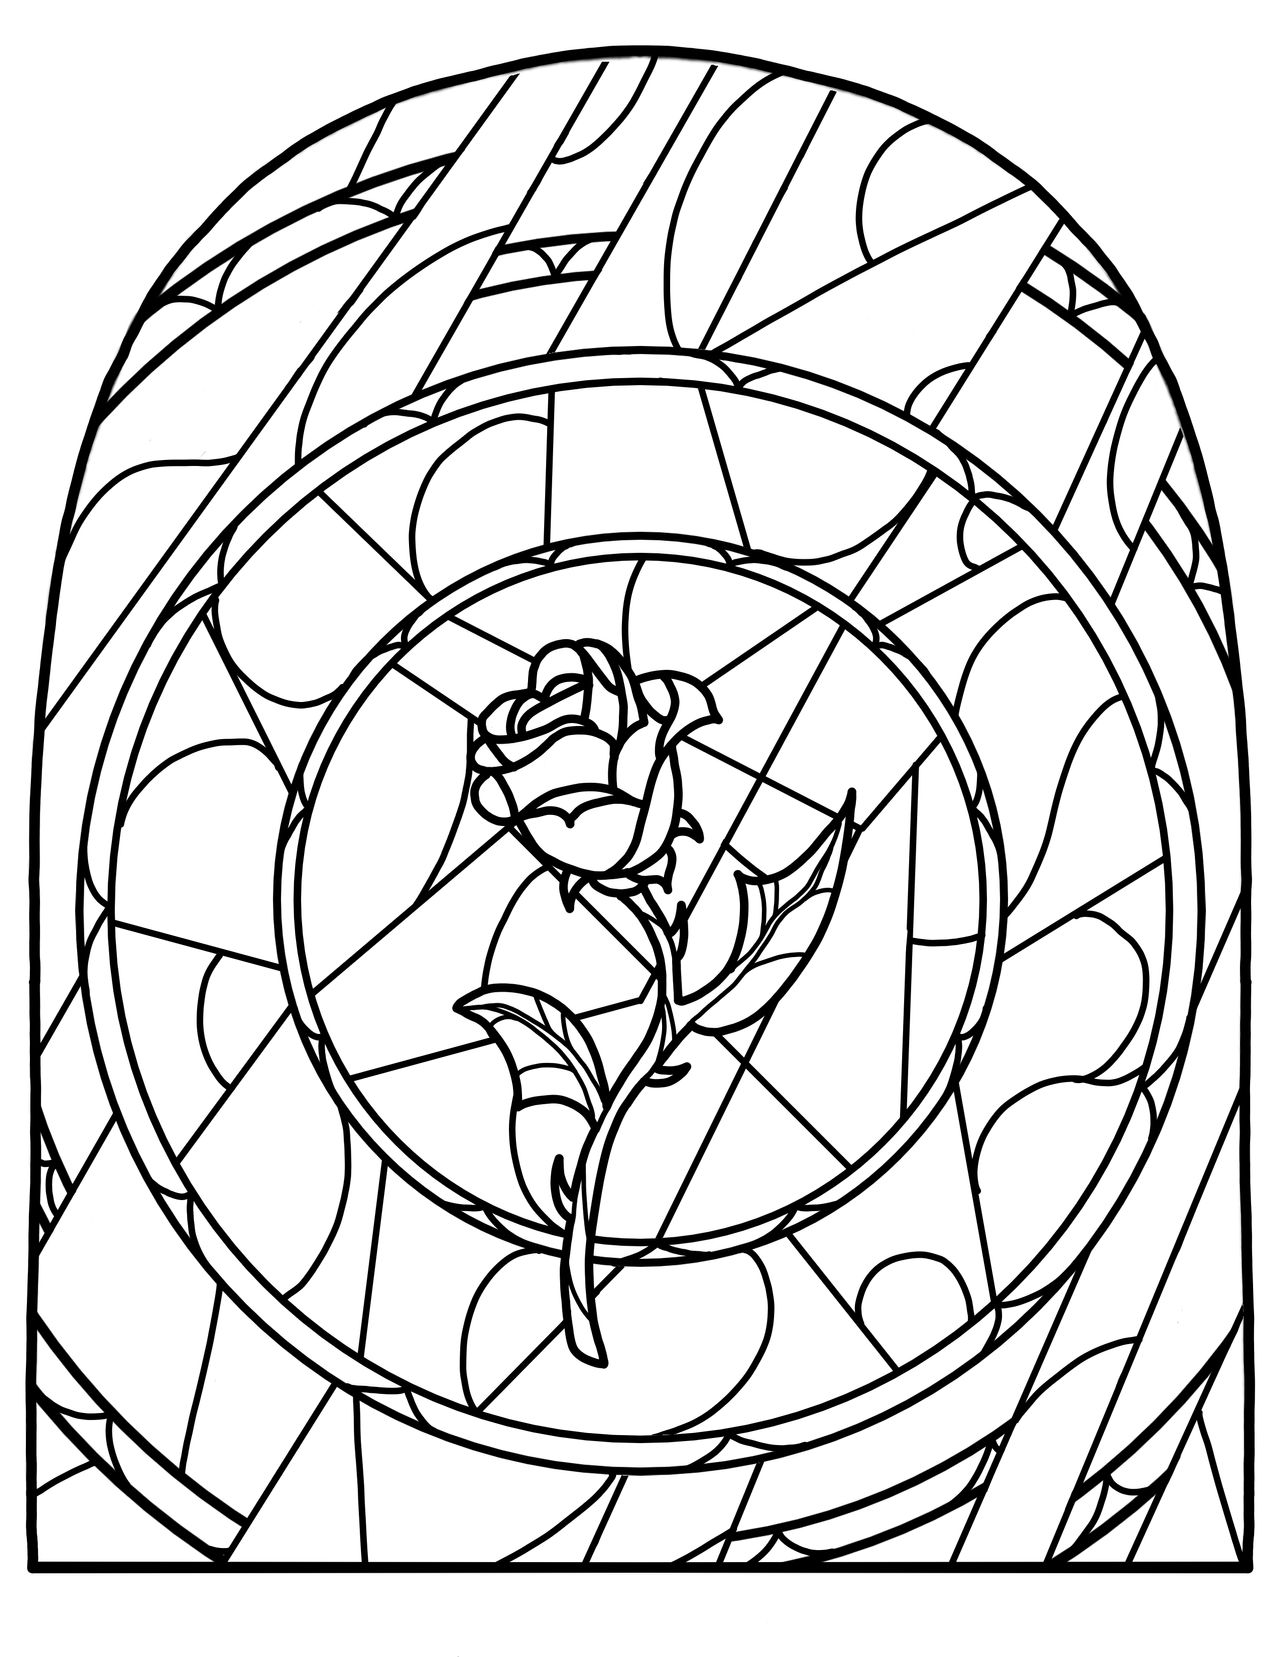 Stained glass rose lineart by nuyisha on